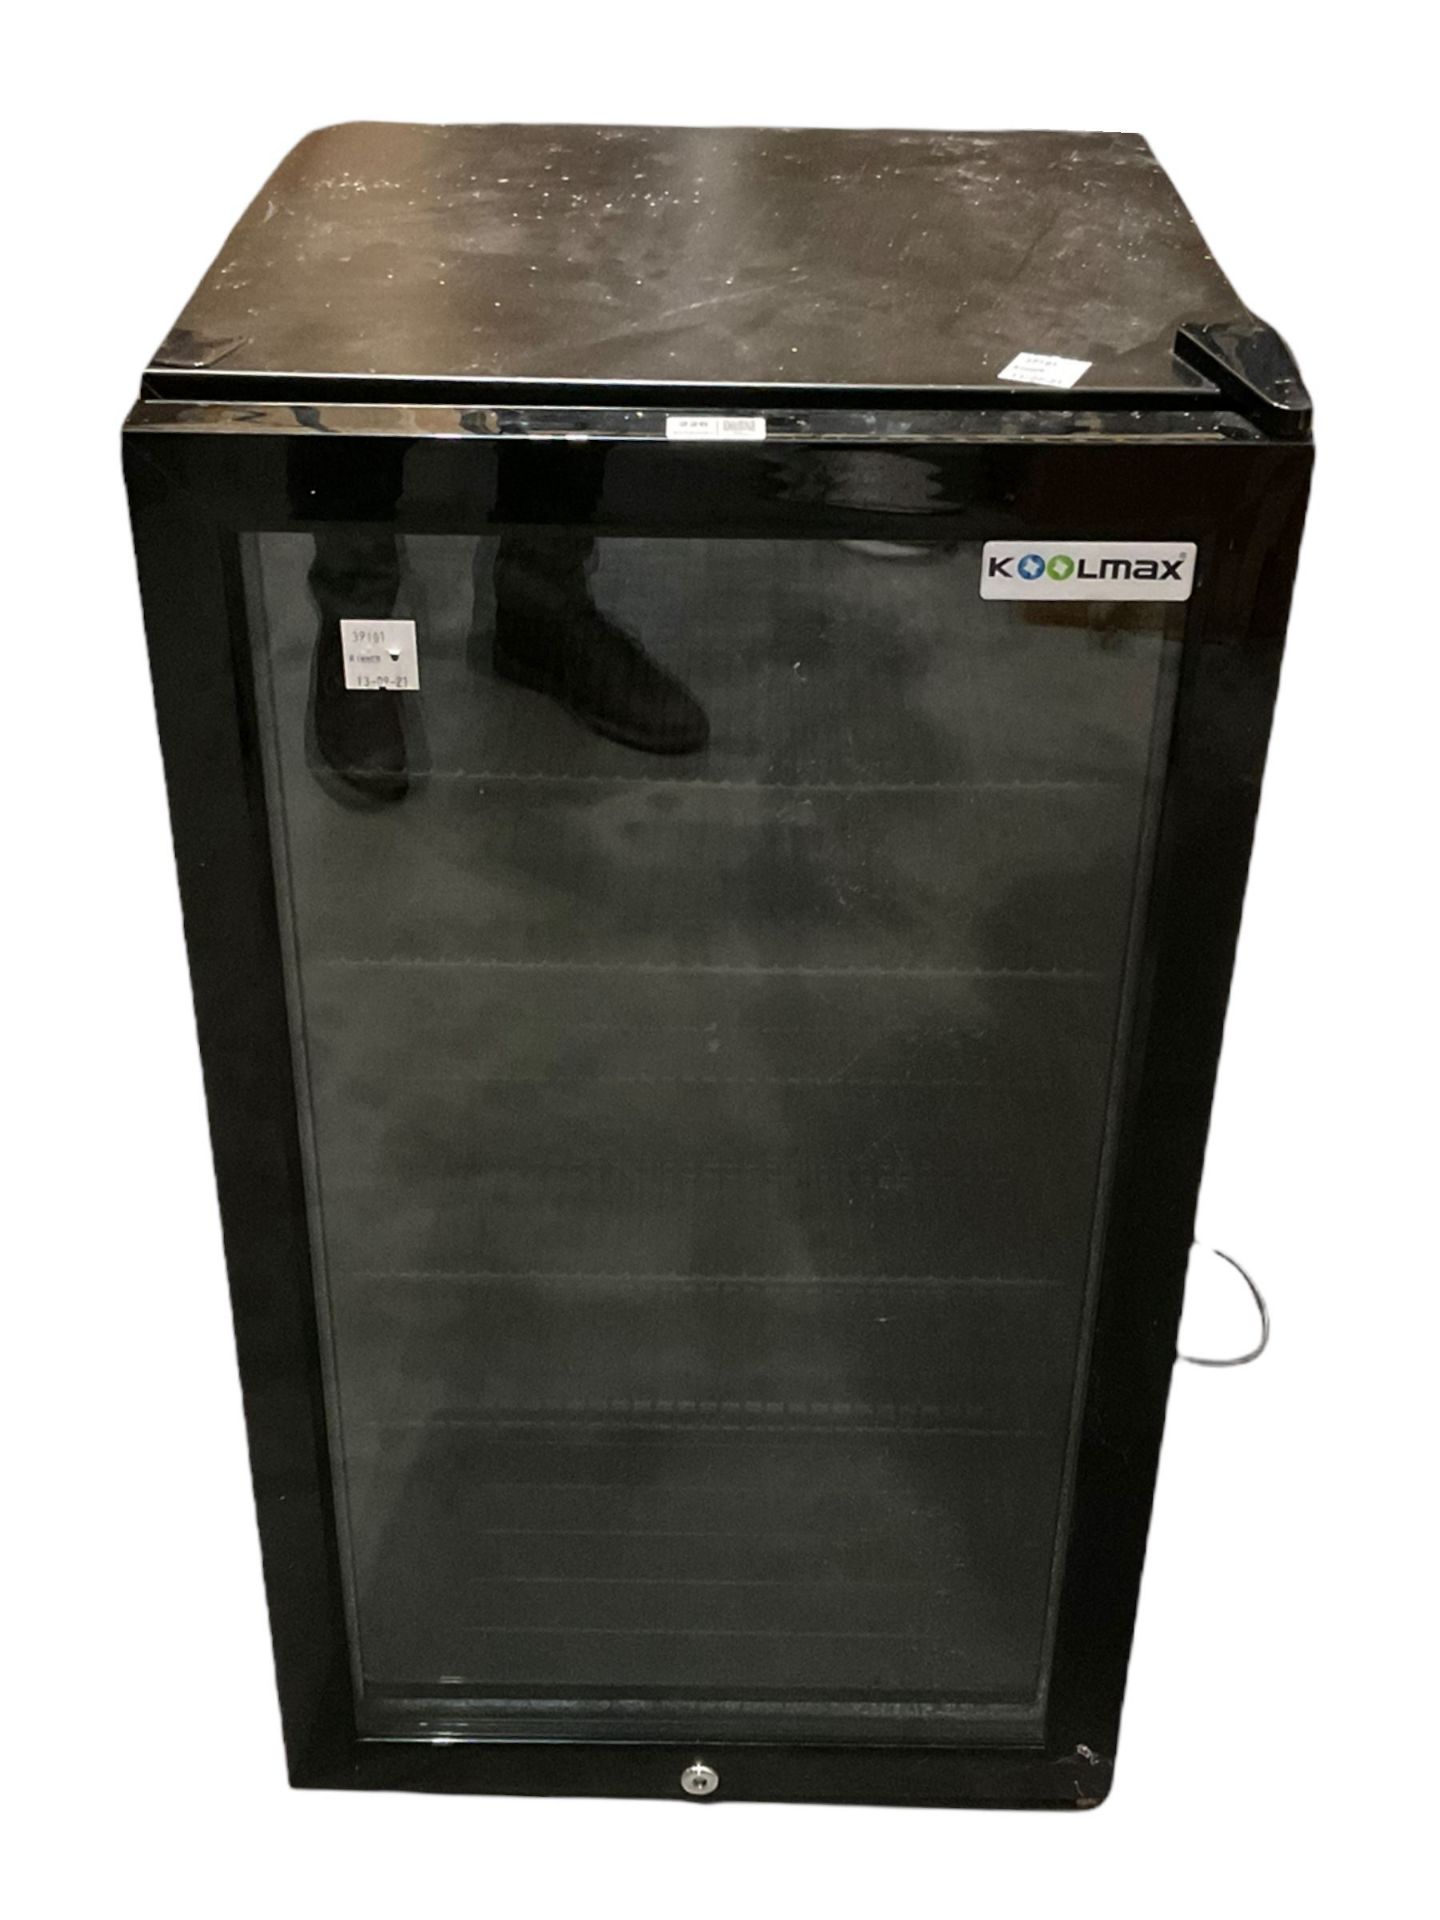 Koolmax drinks fridge - THIS LOT IS TO BE COLLECTED BY APPOINTMENT FROM DUGGLEBY STORAGE